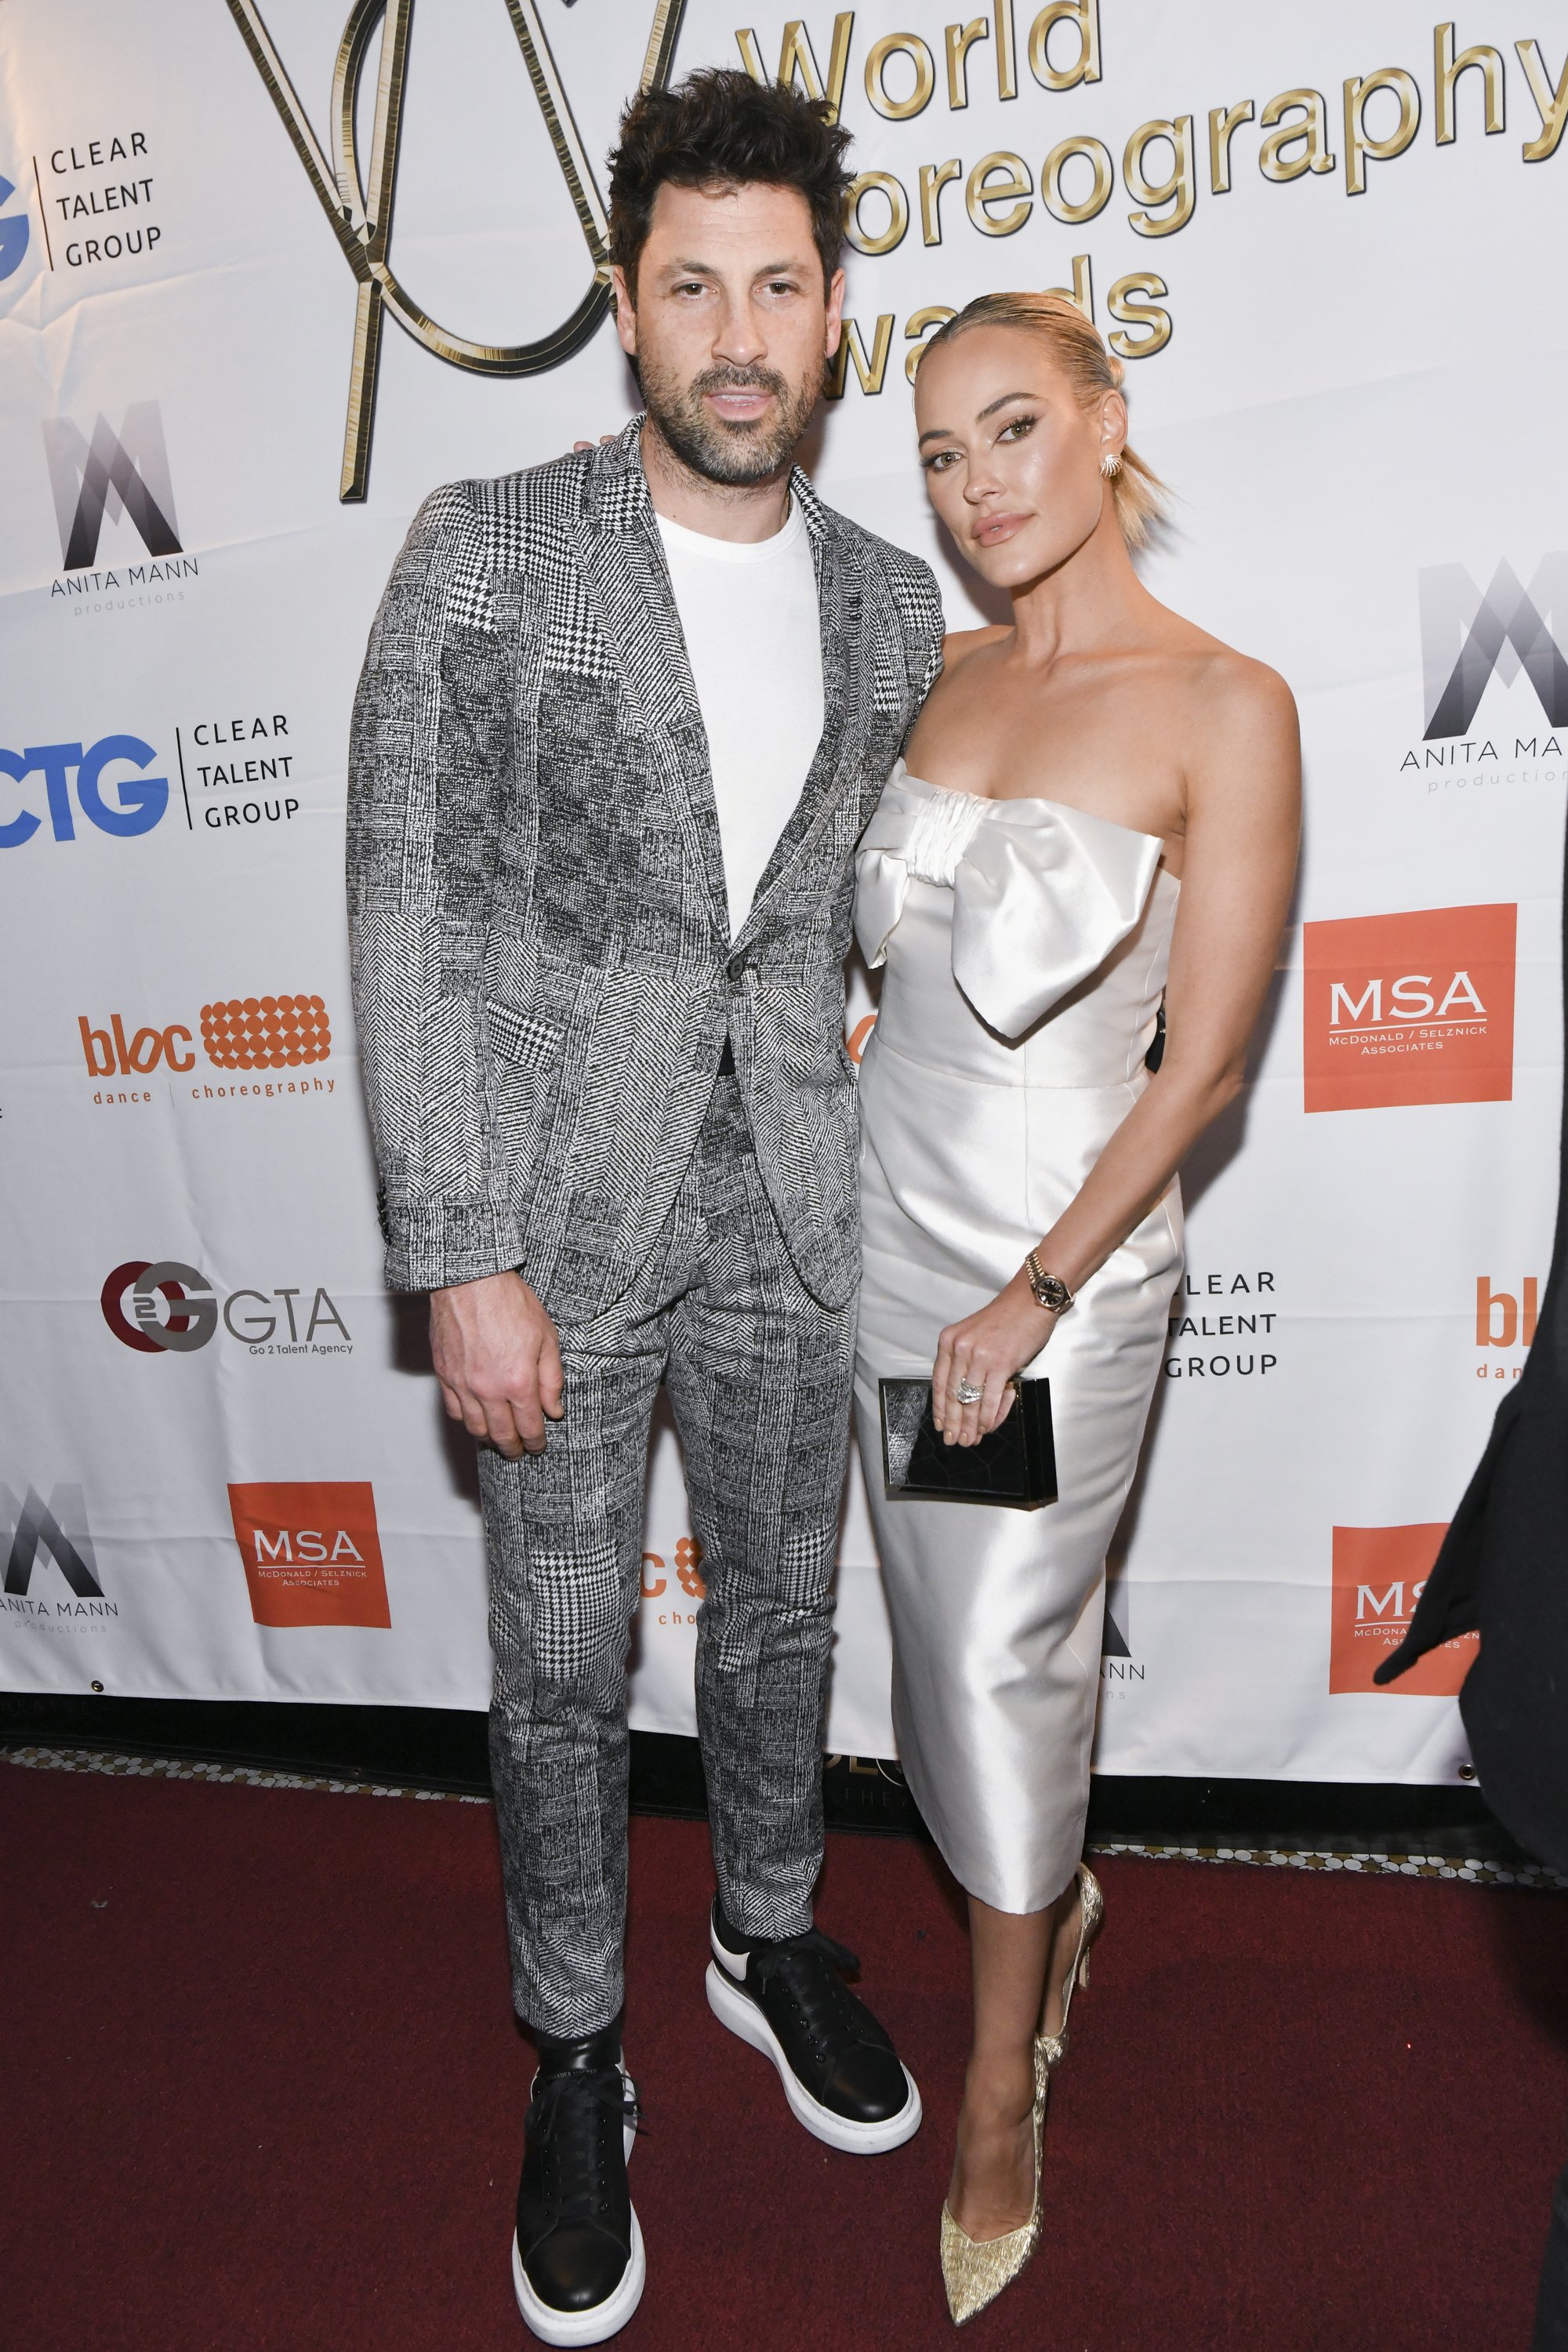 Maksim Chmerkovskiy and Peta Murgatroyd attend the 2021 World Choreography Awards on December 13, 2021 in Los Angeles, California. | Source: Getty Images